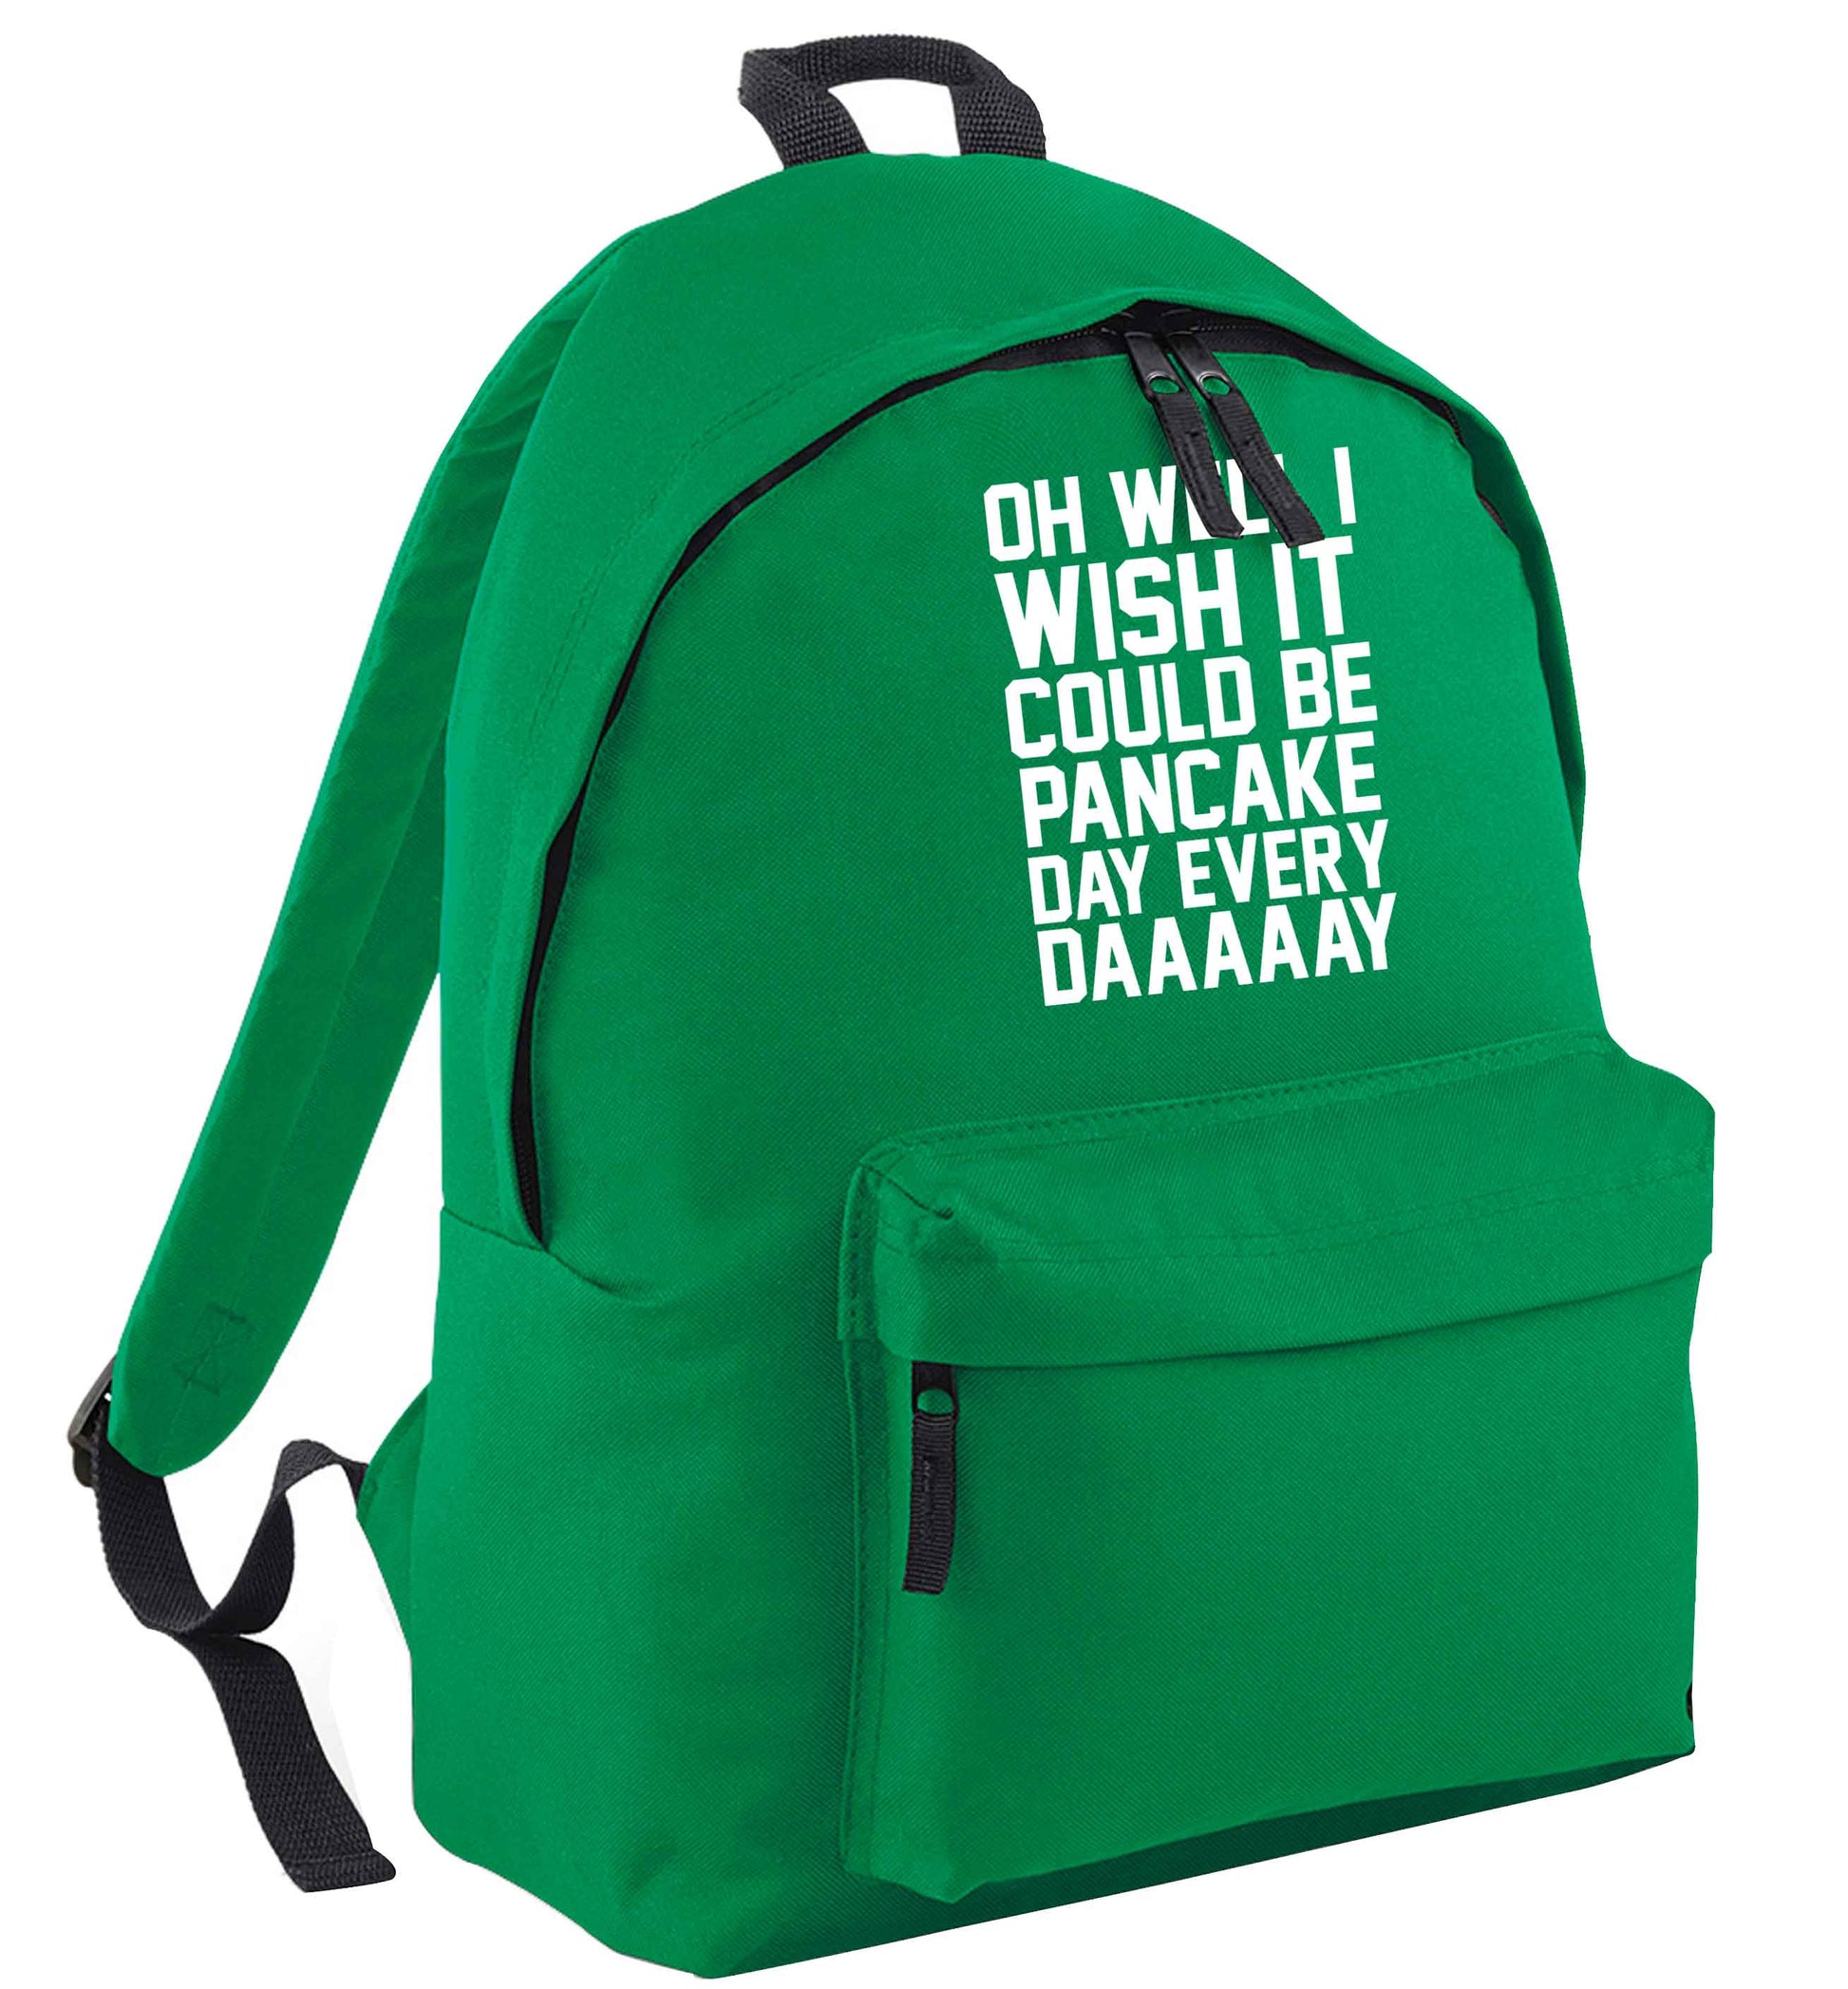 Oh well I wish it could be pancake day every day green adults backpack